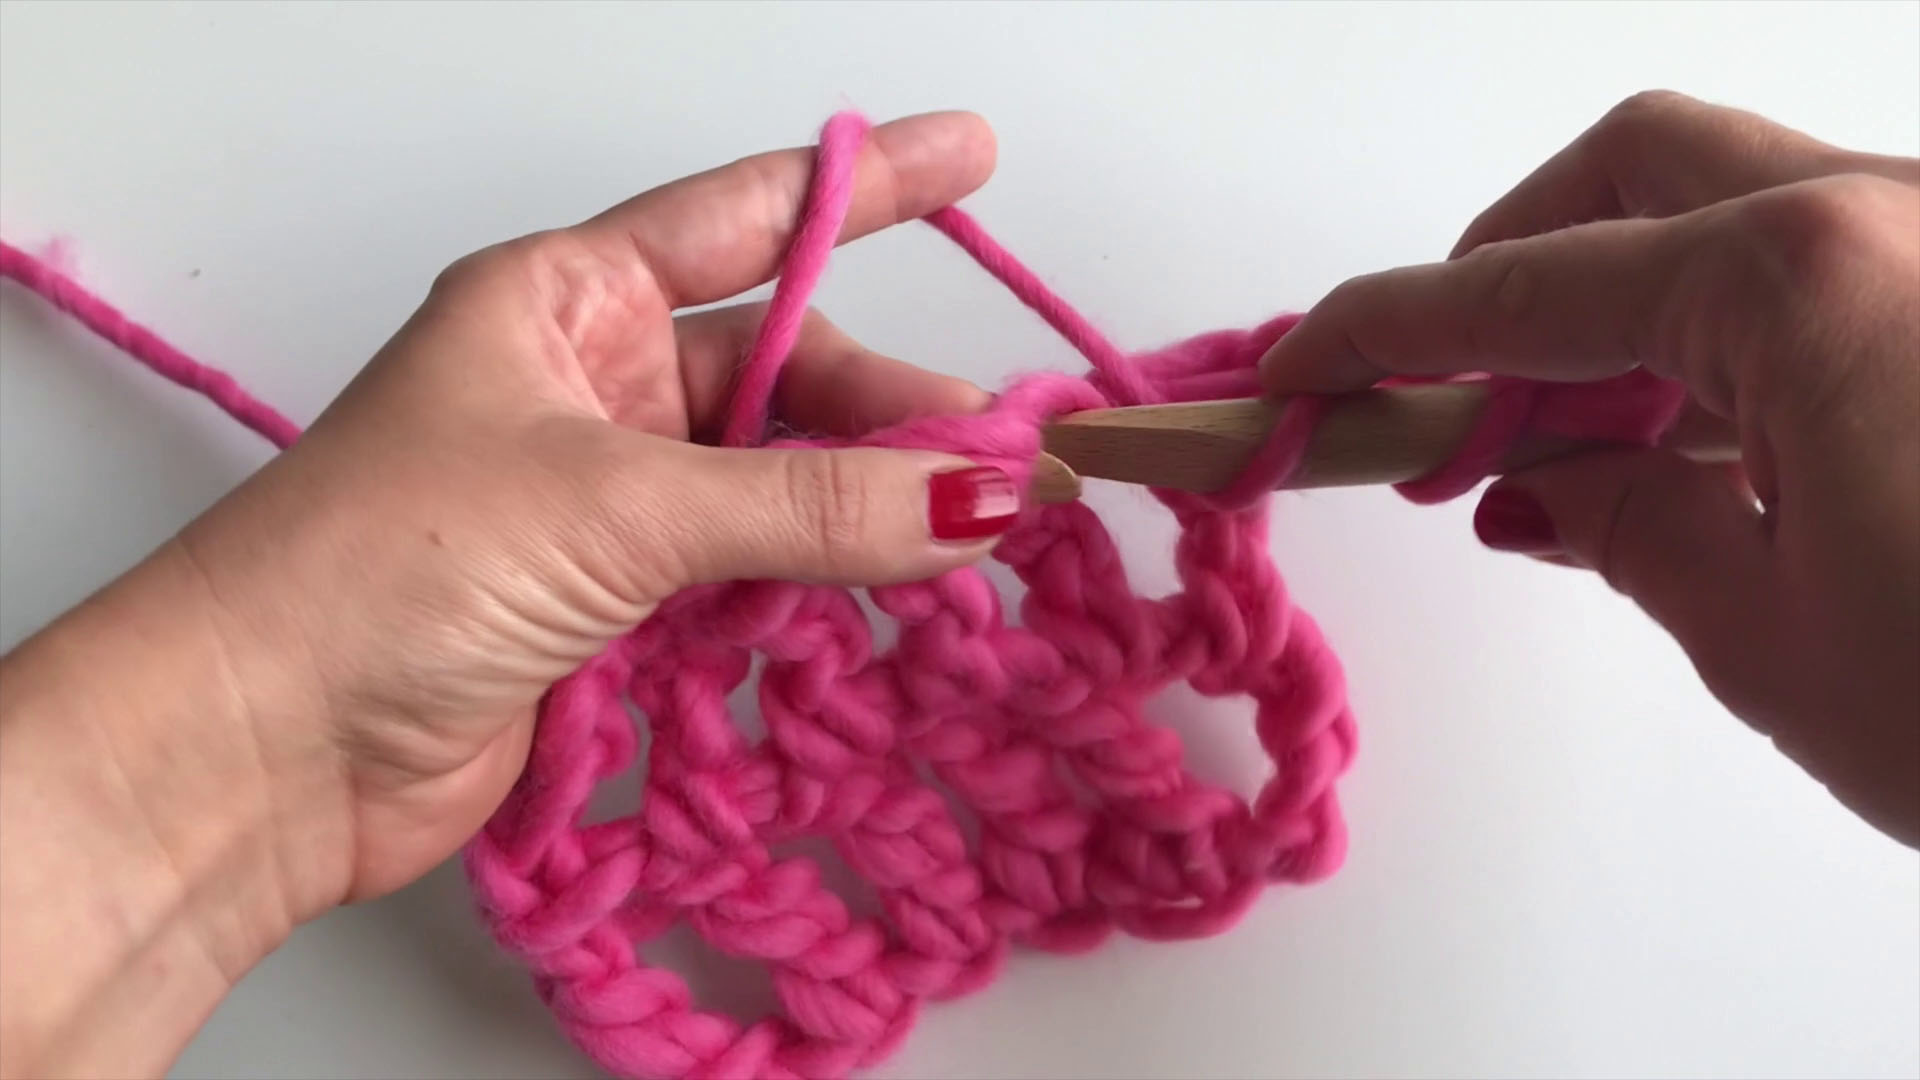 Treble Crochet Stitch - These different basic crochet stitches are the fundamentals to becoming an inventive crocheter. You could use these crochet stitches for blankets or a multitude of other projects. #SingleCrochetStitch #TunisianCrochet #BasicCrrochetStitches